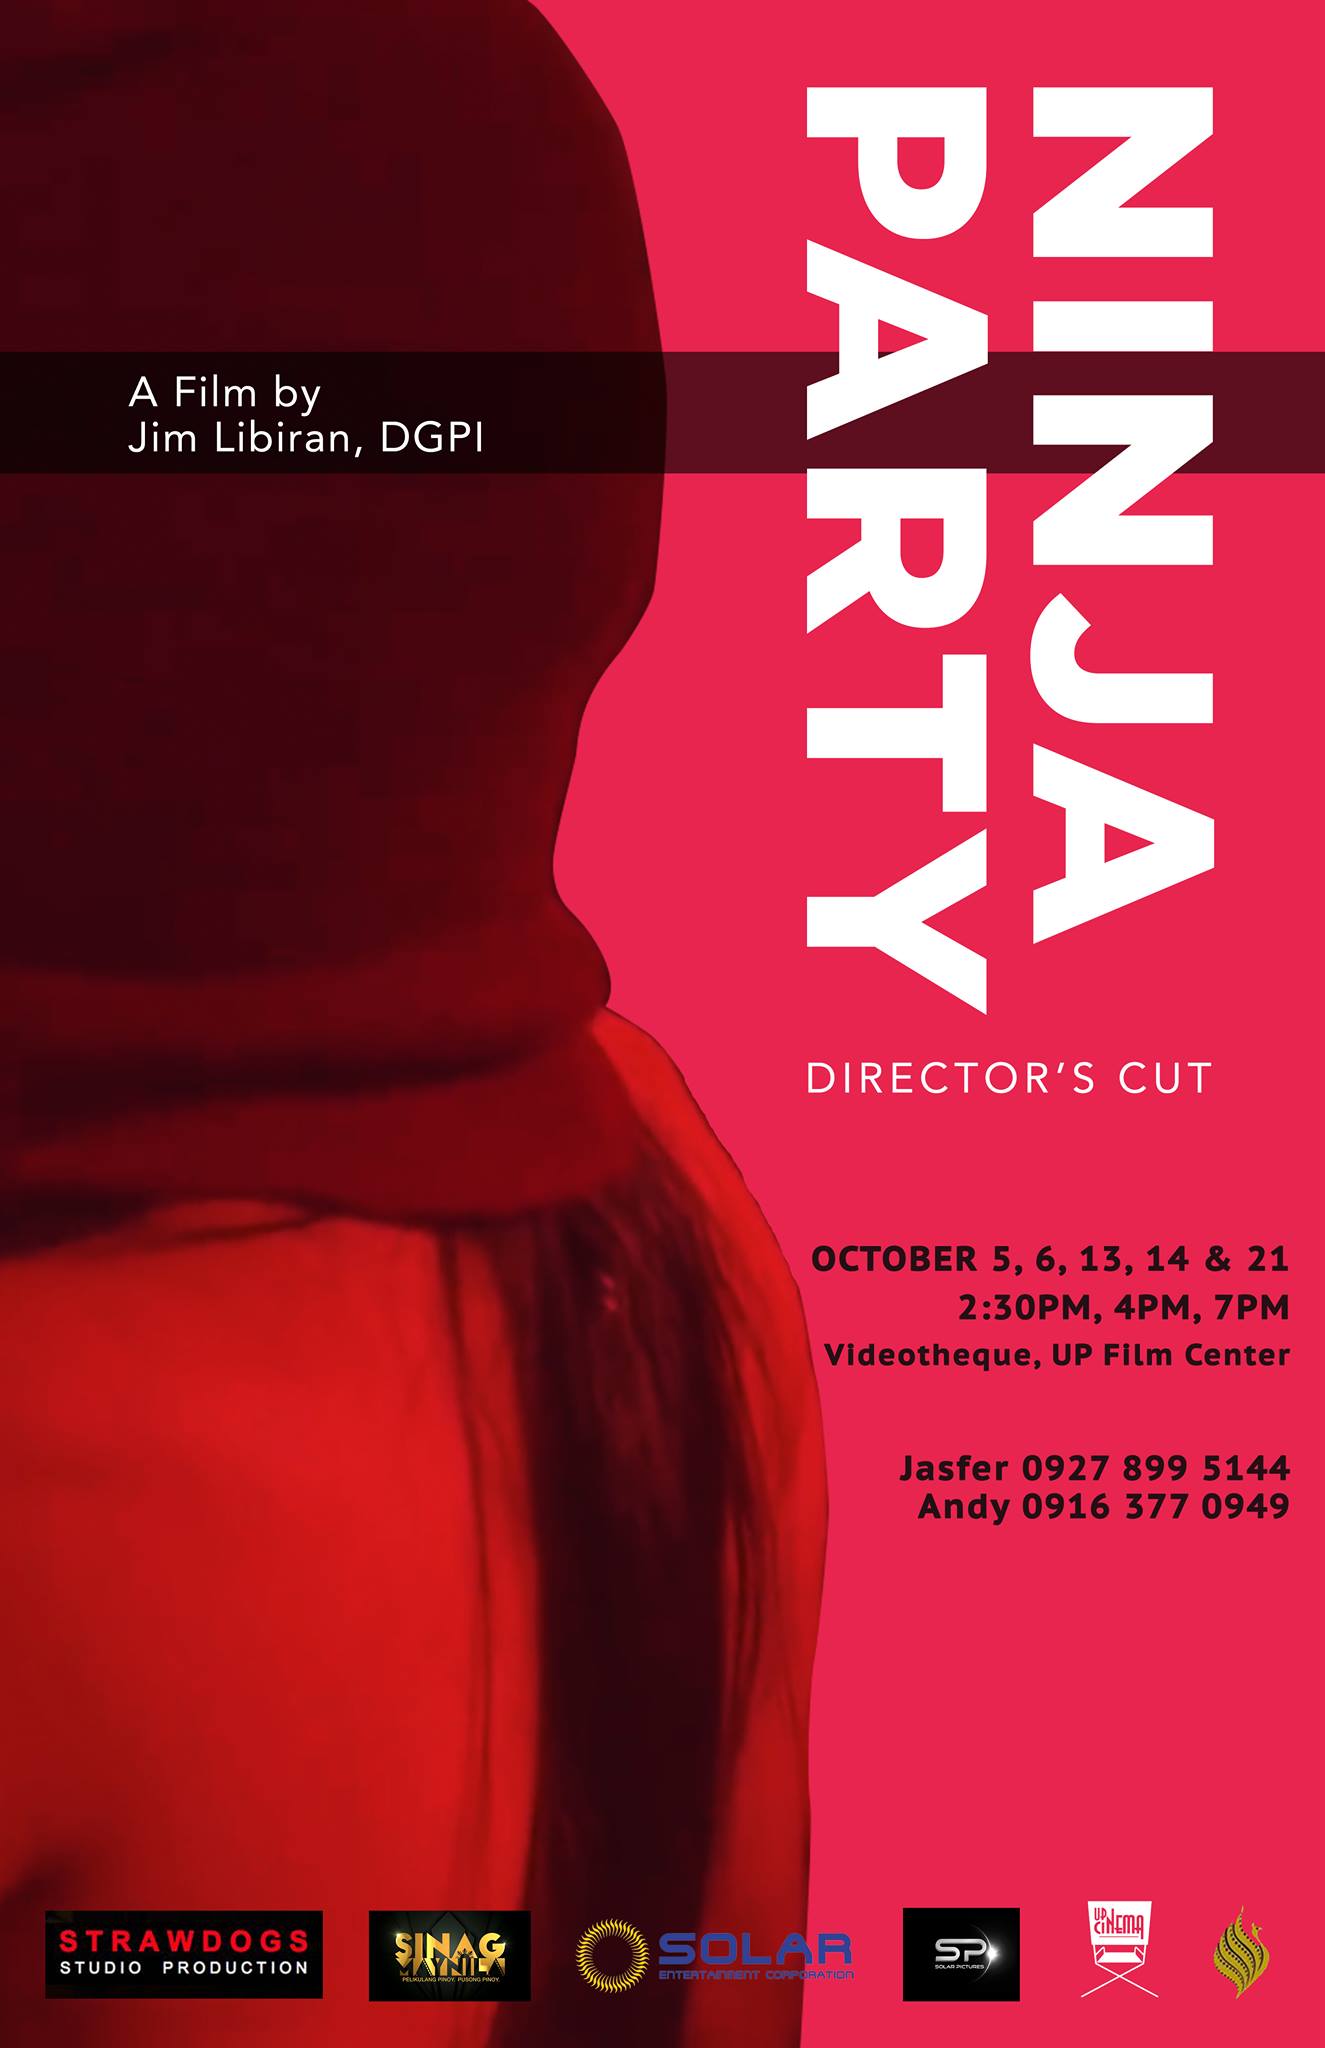 NINJA PARTY @ UP DILIMAN October 5 - October 21 Oct 5 at 7:00pm to Oct 21 at 7:00pm Videotheque, UP Film Center Find Tickets Tickets Available goo.gl Catch Jim Libiran’s Ninja Party at the Videotheque, UP Film Center this coming October! October 5, 6, 13, 14, & 21 2:30PM, 4:00PM, & 7PM Php 150 Forum with the cast and crew of the film on the premiere on October 5, 7PM. Grab your tickets now! Contact Jasfer at 0927 899 5144 or Andy at 0916 377 0949 You may also reserve your tickets online at http://bit.ly/RT-NinjaParty This screening is brought to you by Sinag Maynila, Strawdogs Studio Production, Solar Pictures, and Solar Entertainment Corporation in partnership with U.P. Cinema and UP Cine Adarna.